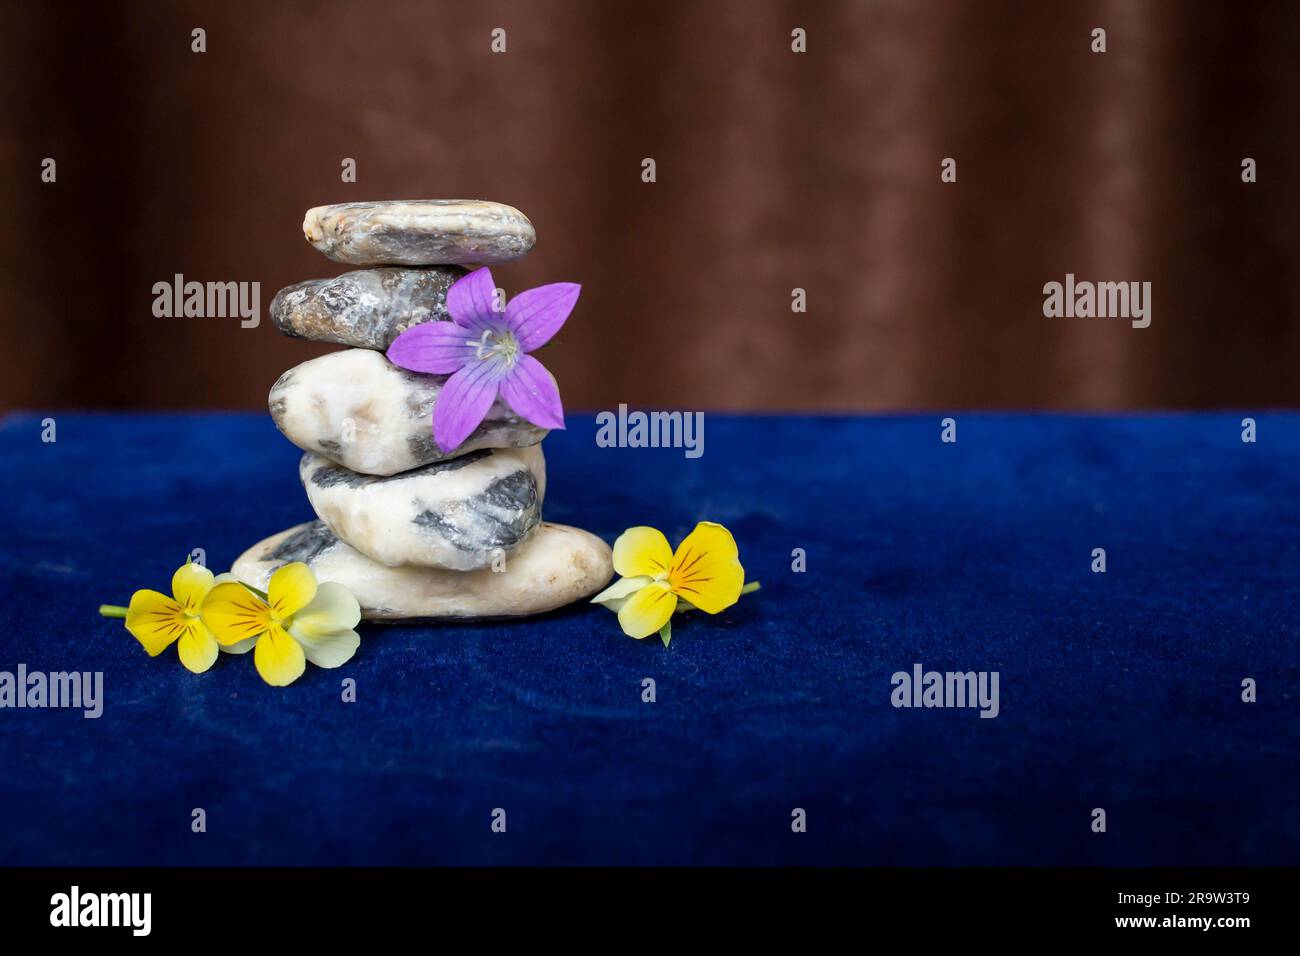 White stones stack on blue velvet and brown courtains, with Viola tricolor little flowers, serene zen backdrop for wellness product display. Stock Photo